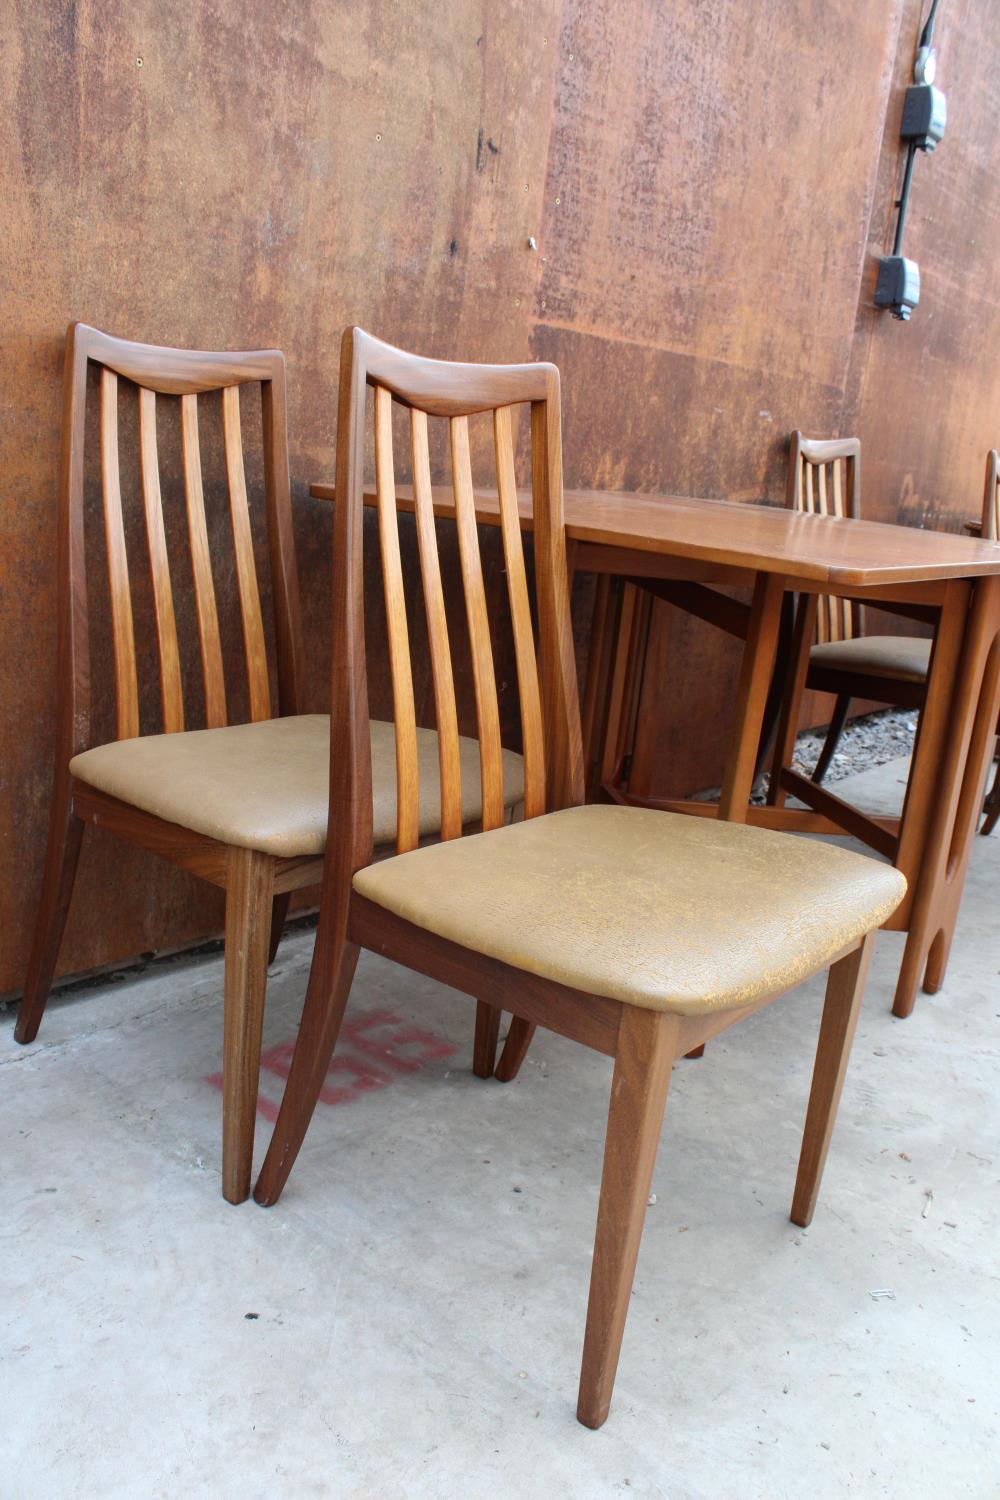 A RETRO TEAK DROP-LEAF DINING TABLE, 57" X 33" OPENED AND FOUR DINING CHAIRS - Image 3 of 4